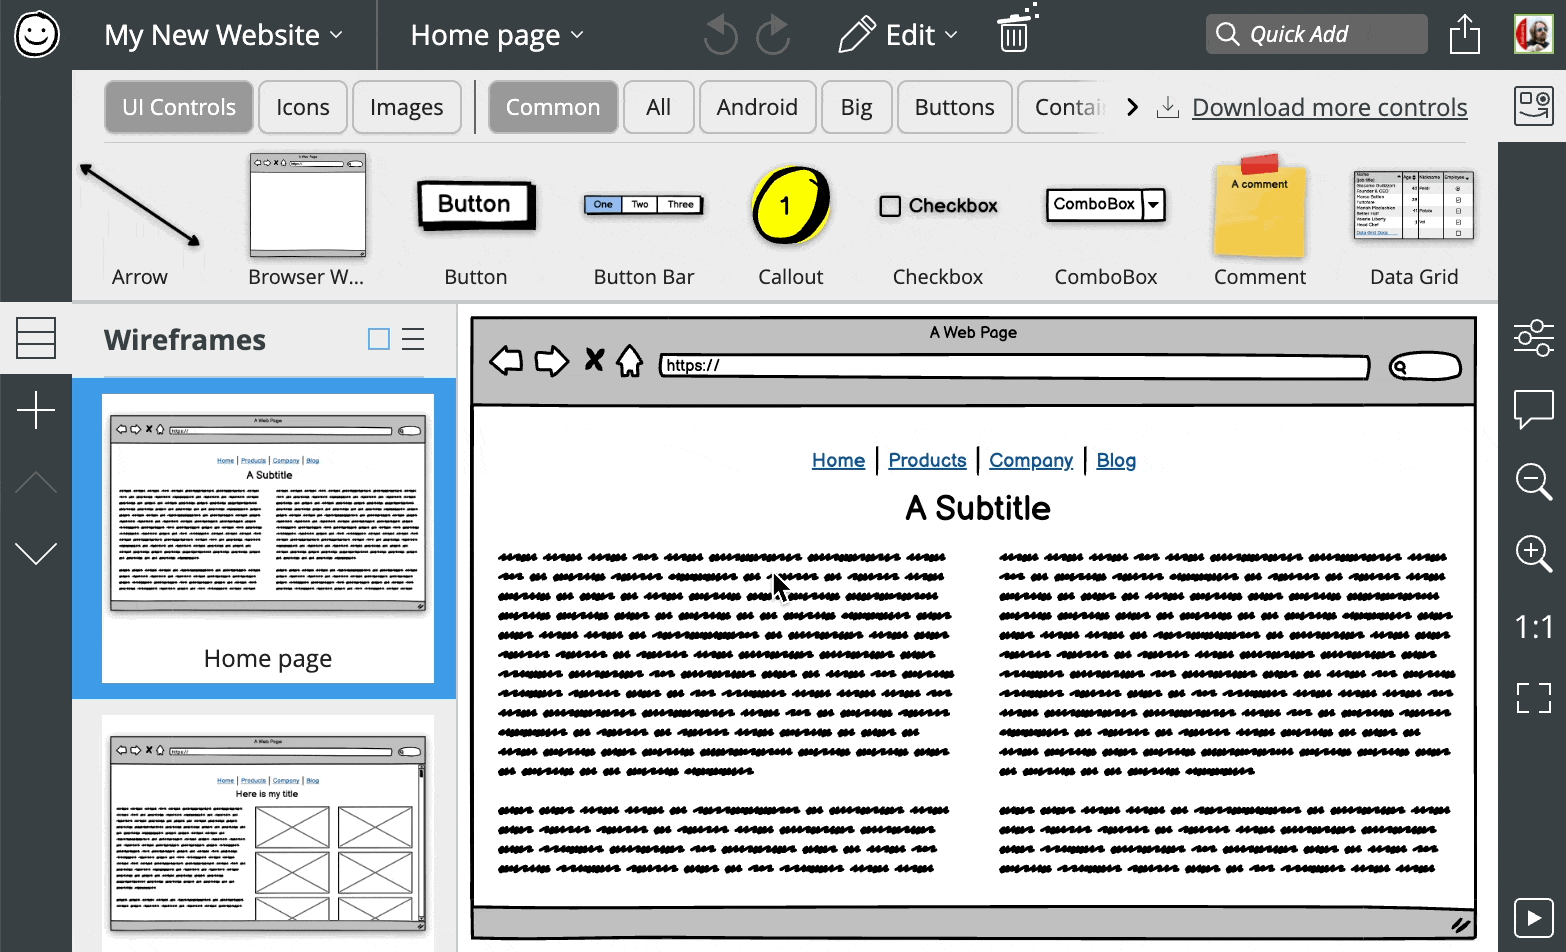 Wireframing software Balsamiq user interface view with a website mockup